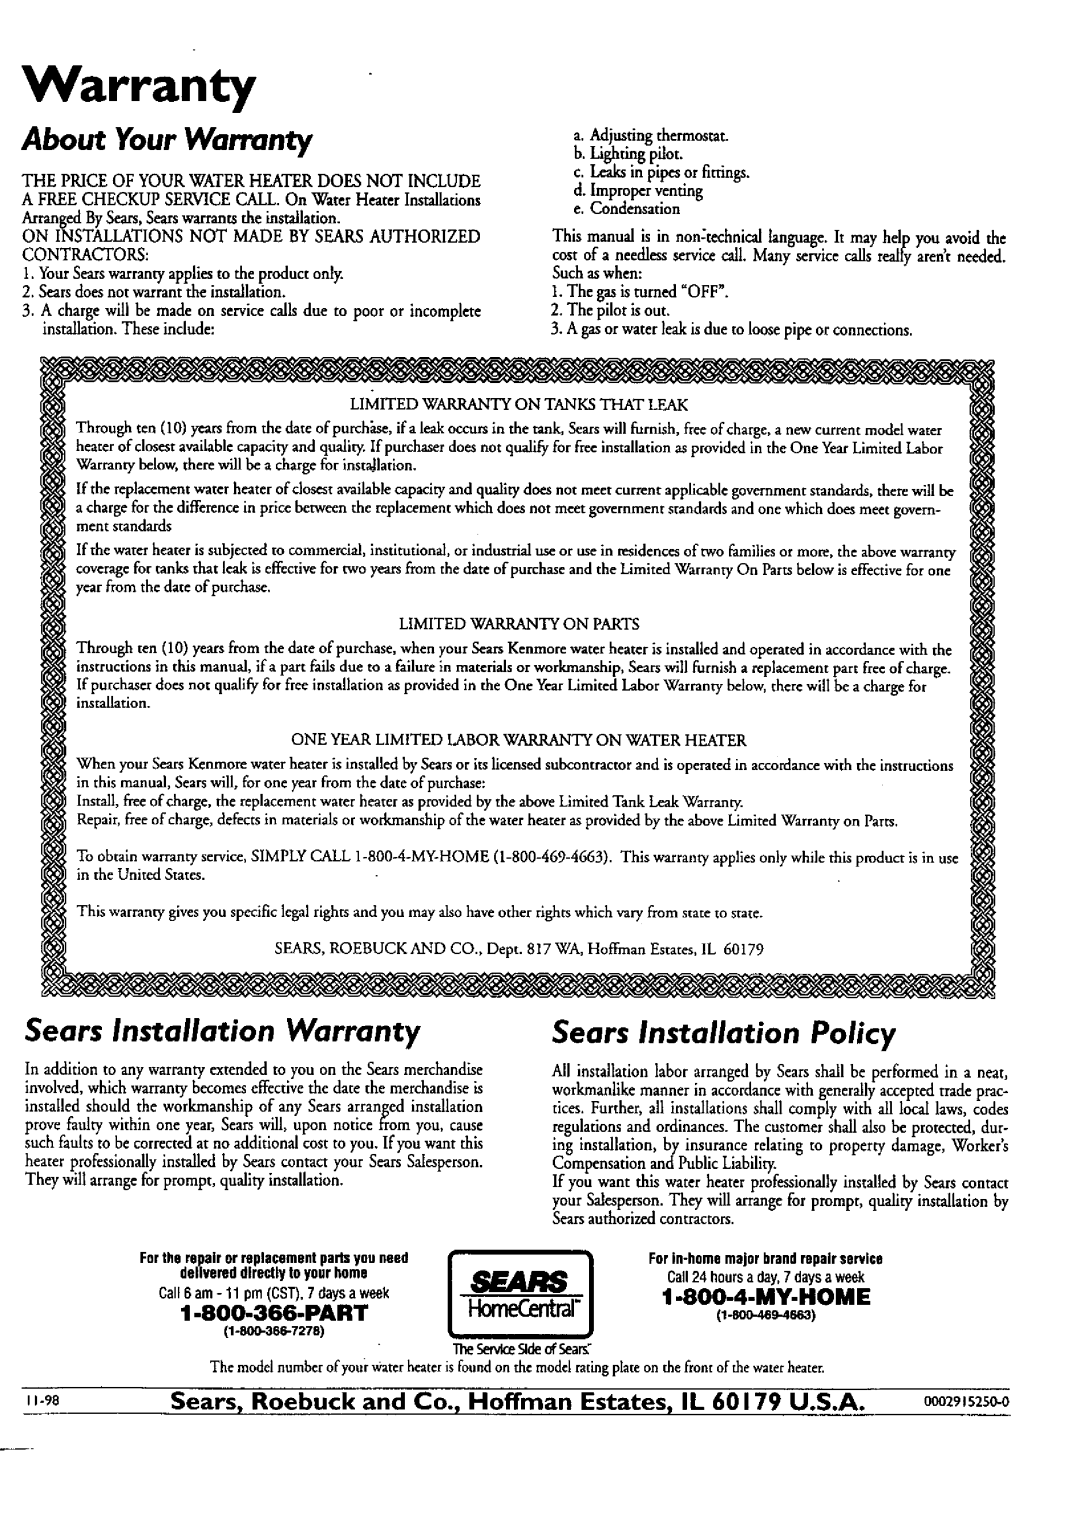 Kenmore 153.330401 owner manual About Your Warranty, Sears Installation Warranty, Sears Installation Policy 